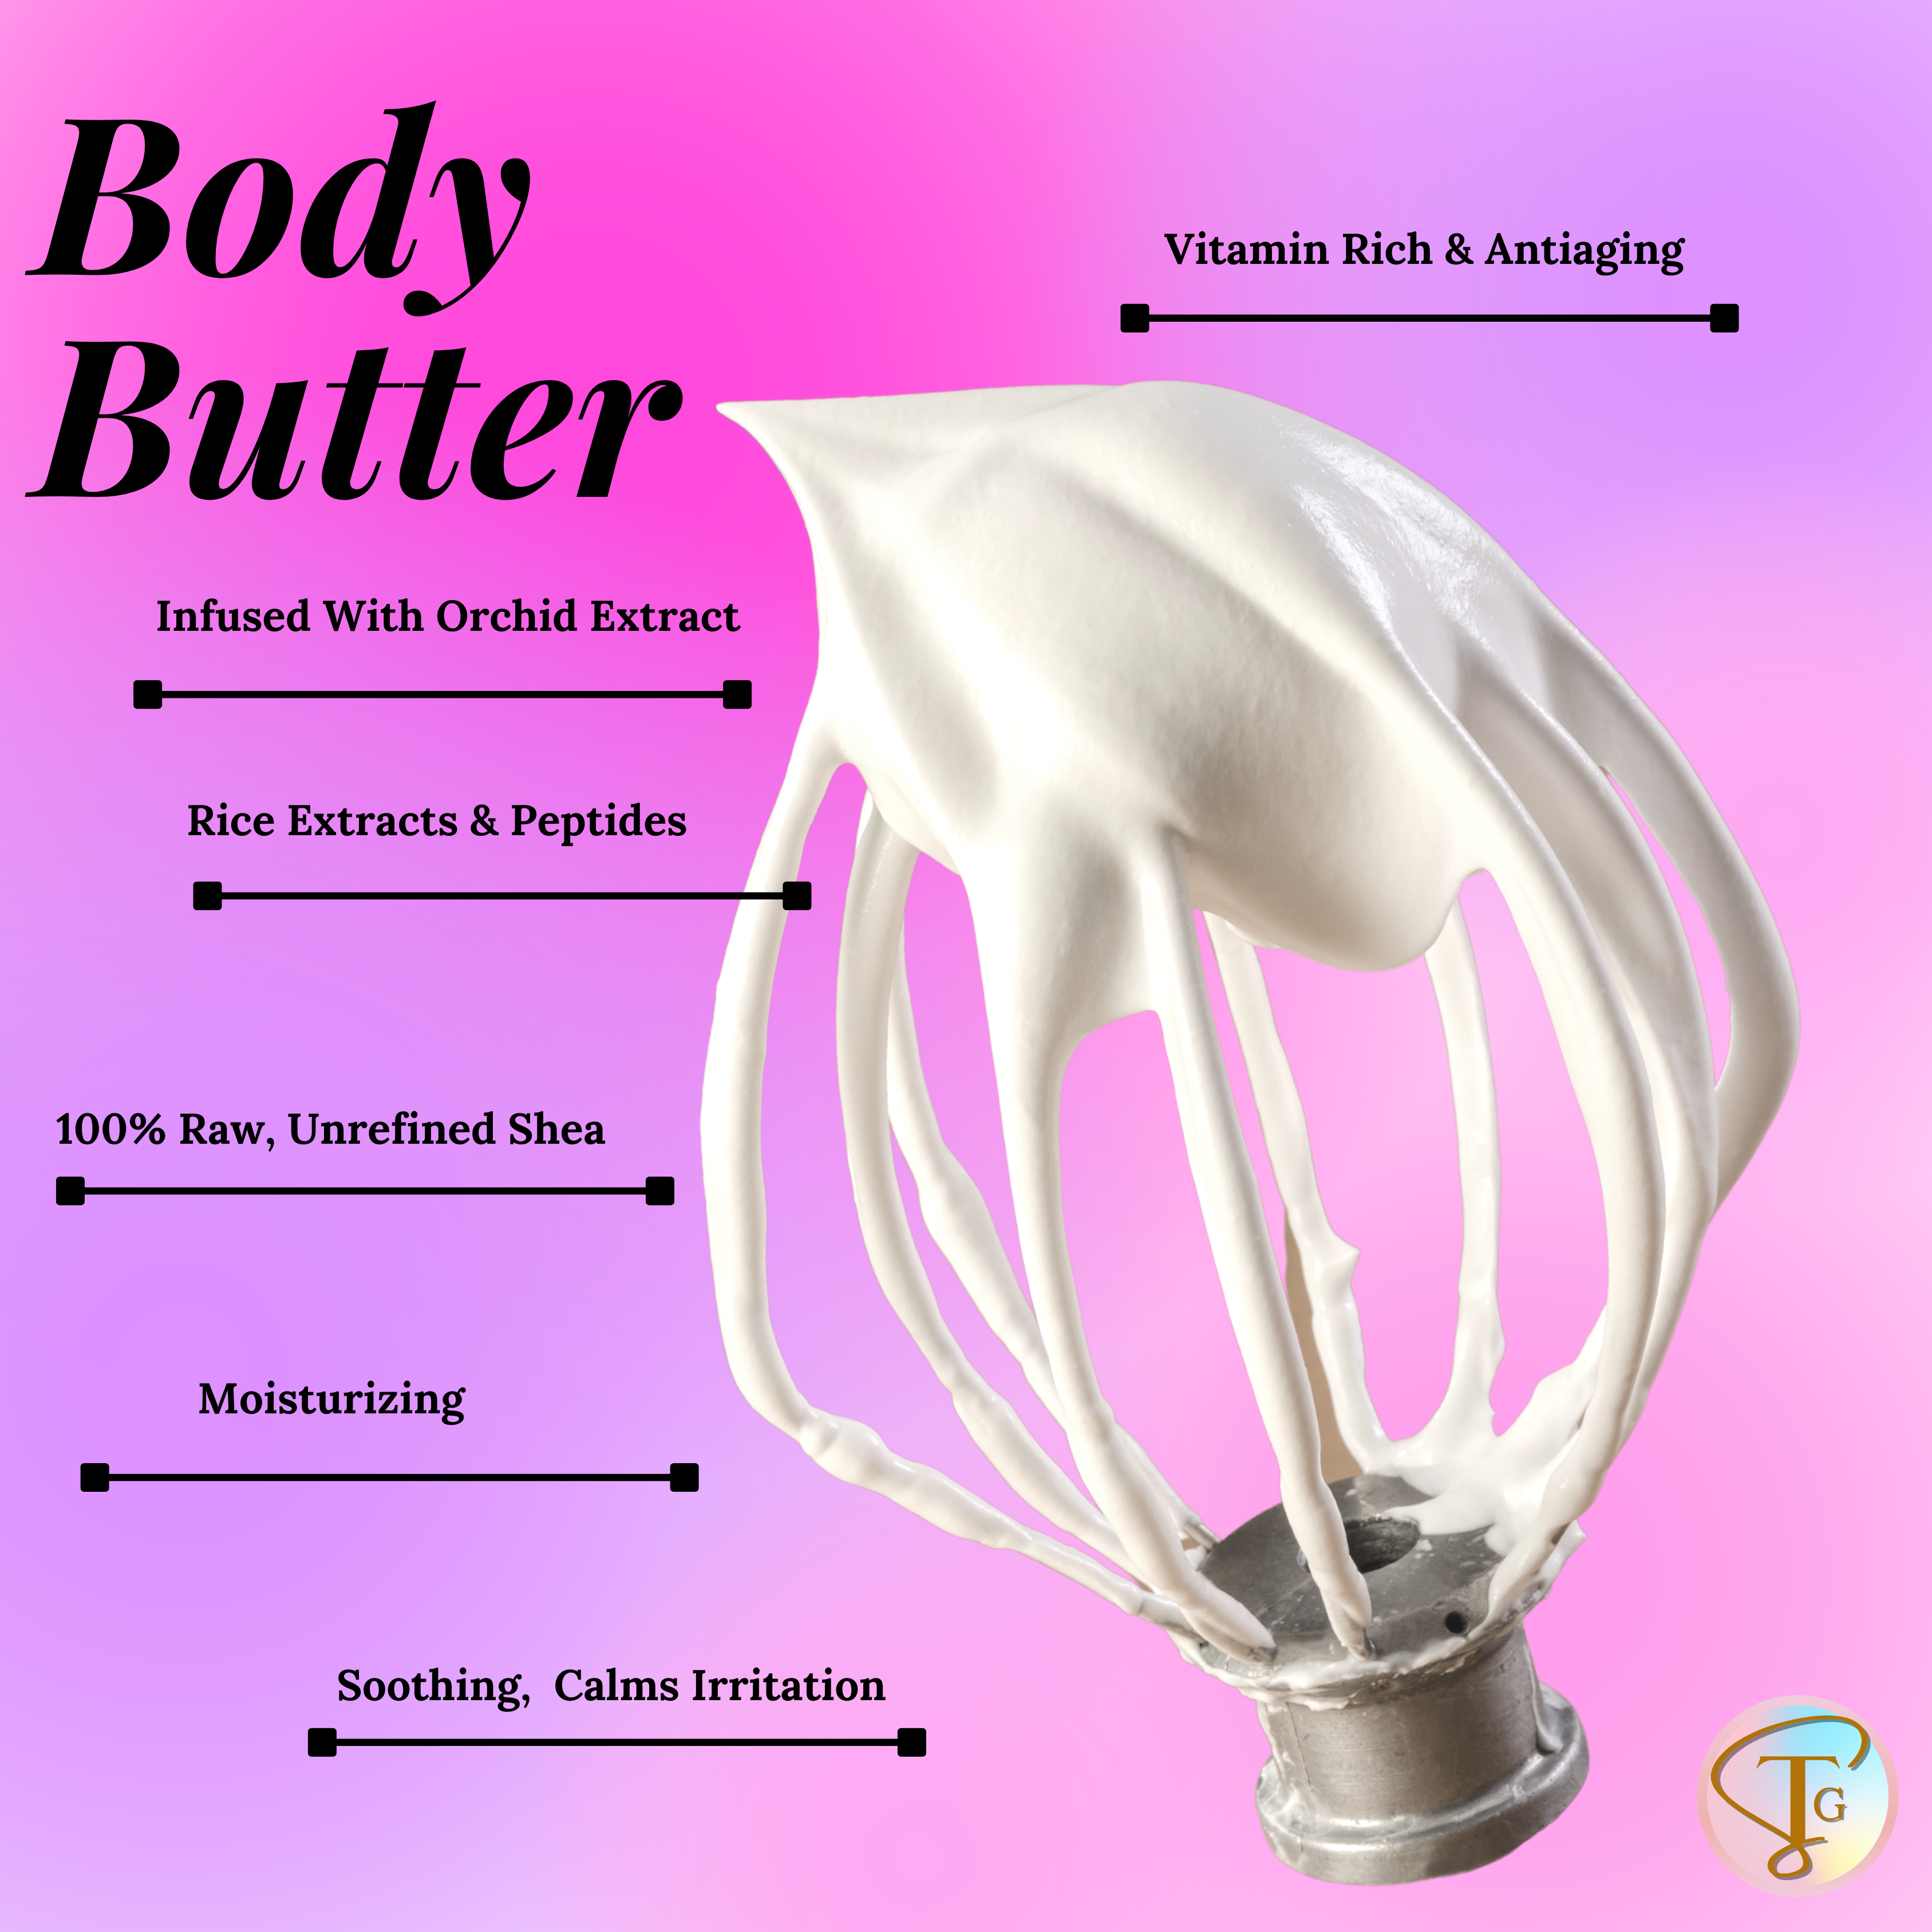 Sweetest Confection Body Butter